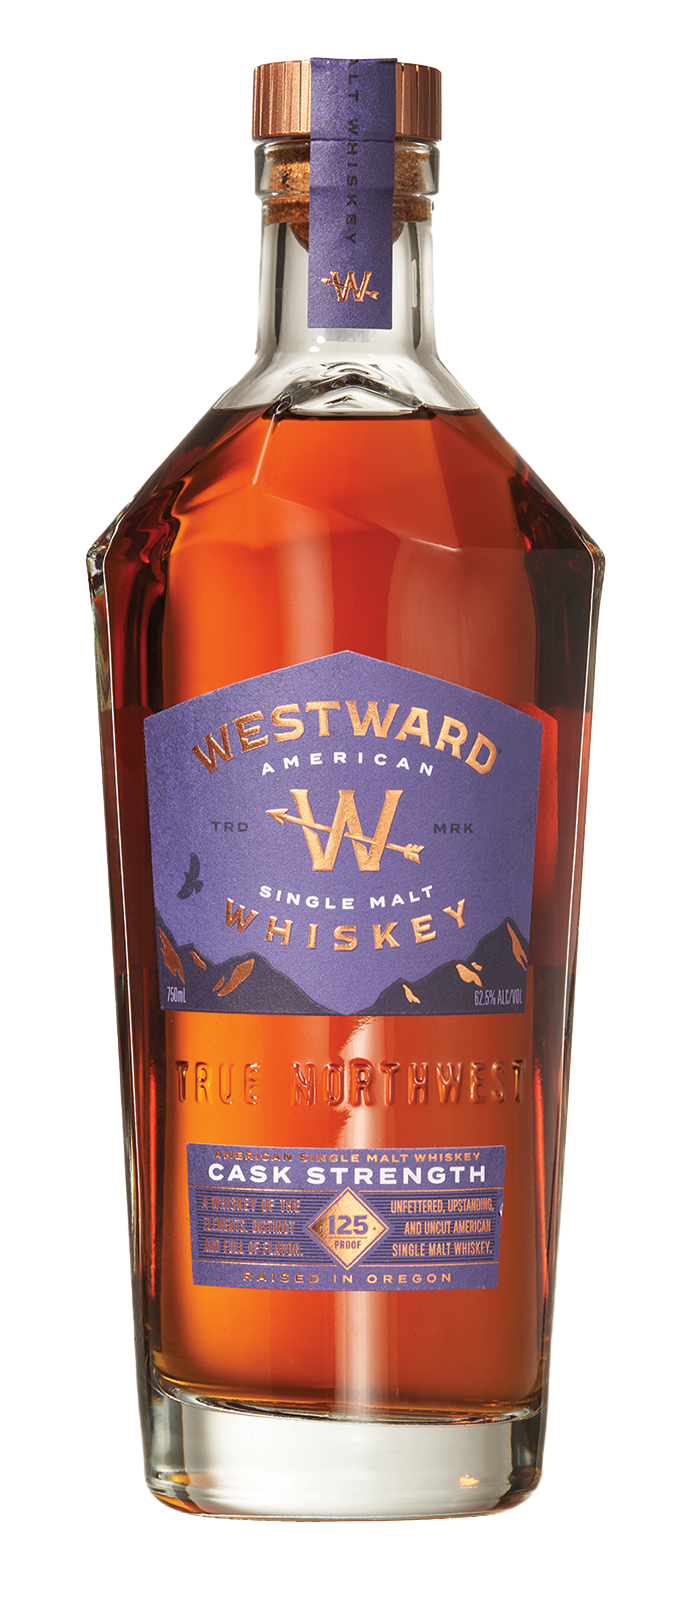 Top5 Wa0422 Westward The 10 Best Whiskeys Of 2022, According To 'Whisky Advocate'